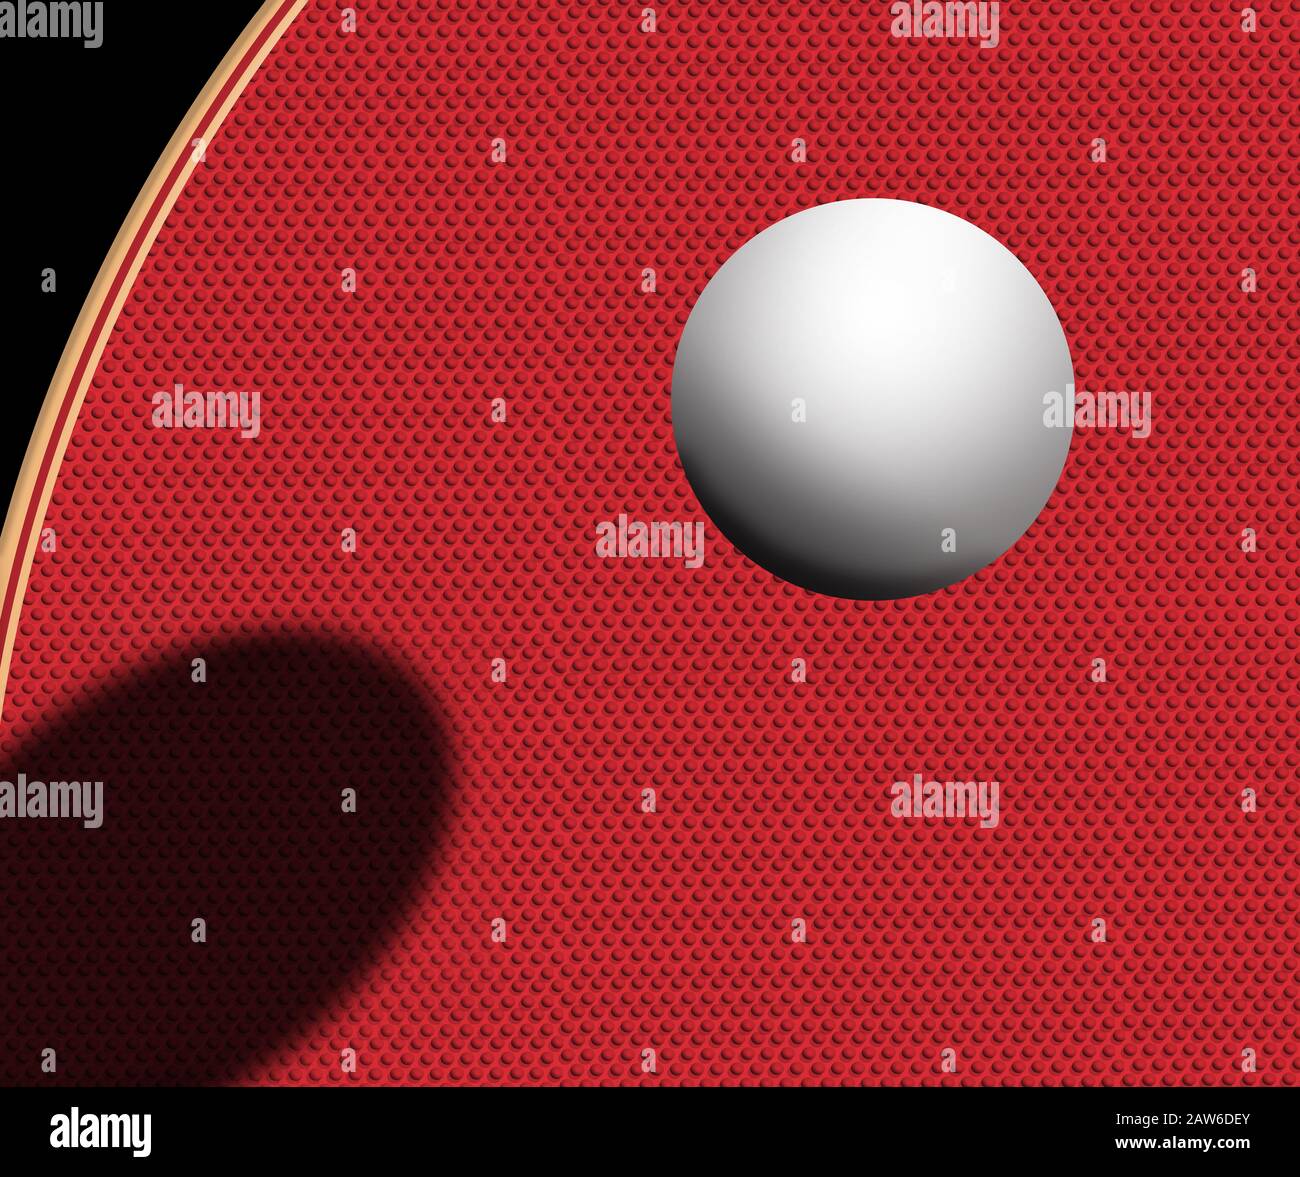 A table tennis ball and paddle are seen in this sunny illustration about the sport of ping pong. Stock Photo